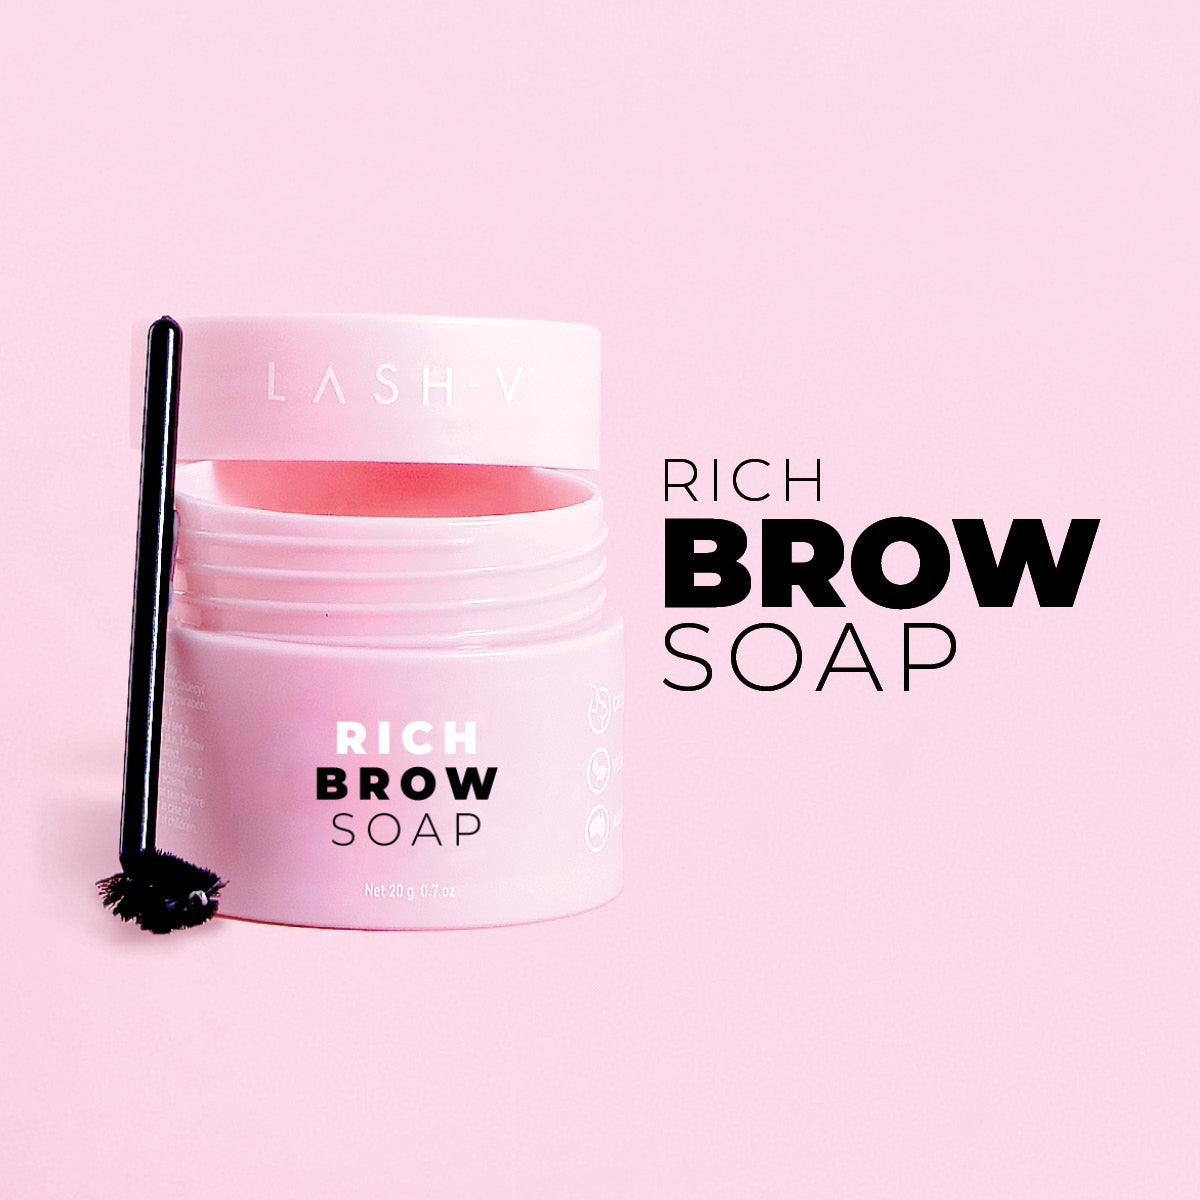 RICH BROW SOAP - instant brow lamination